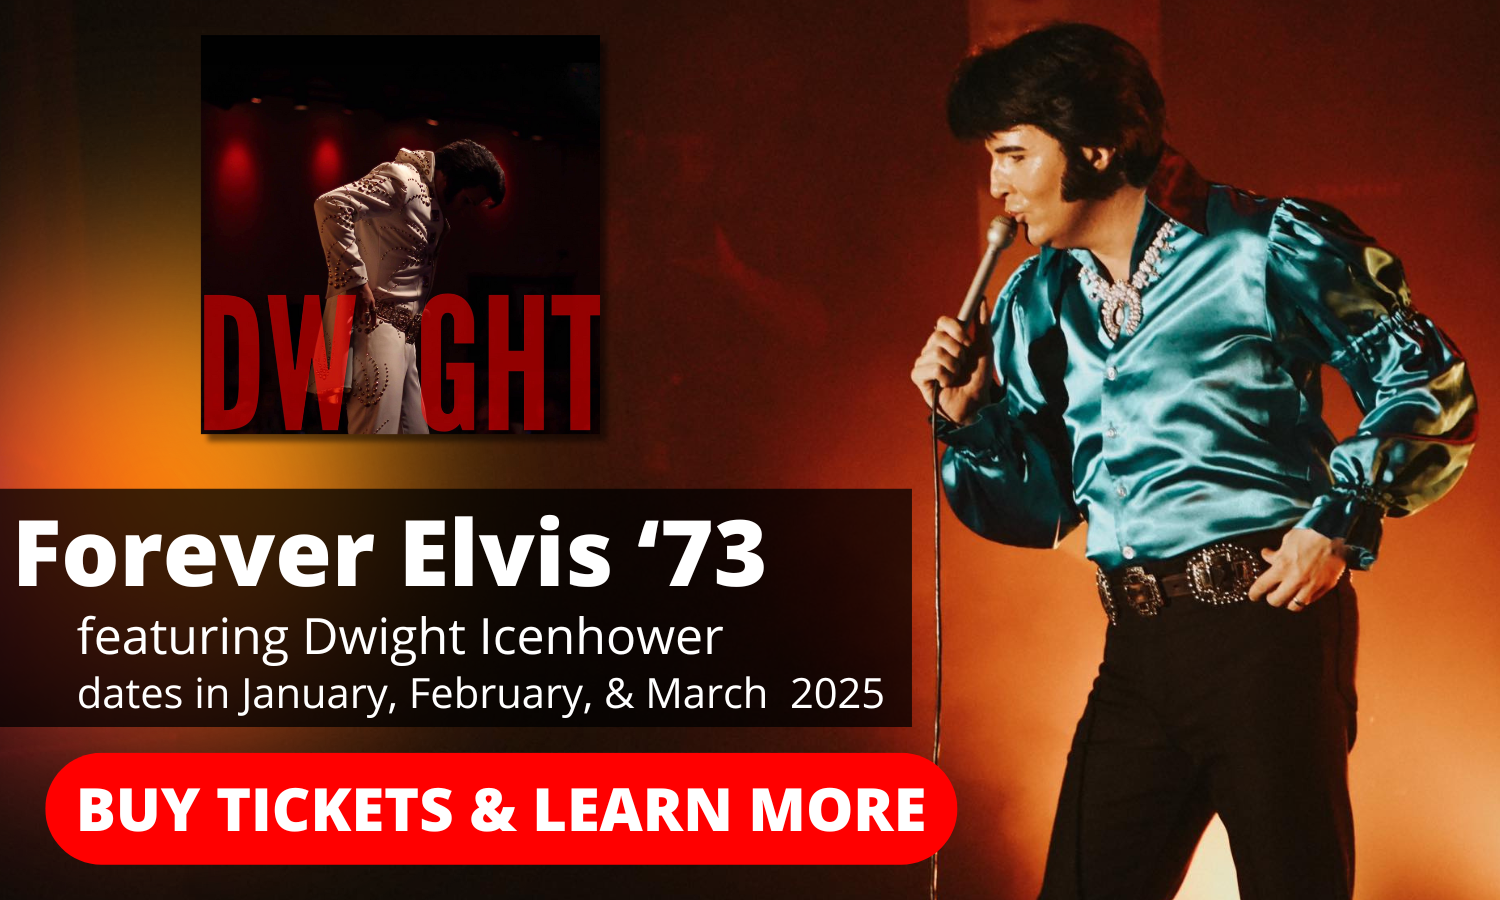 Forever Elvis '73 featuring Dwight Icenhower | Buy Tickets